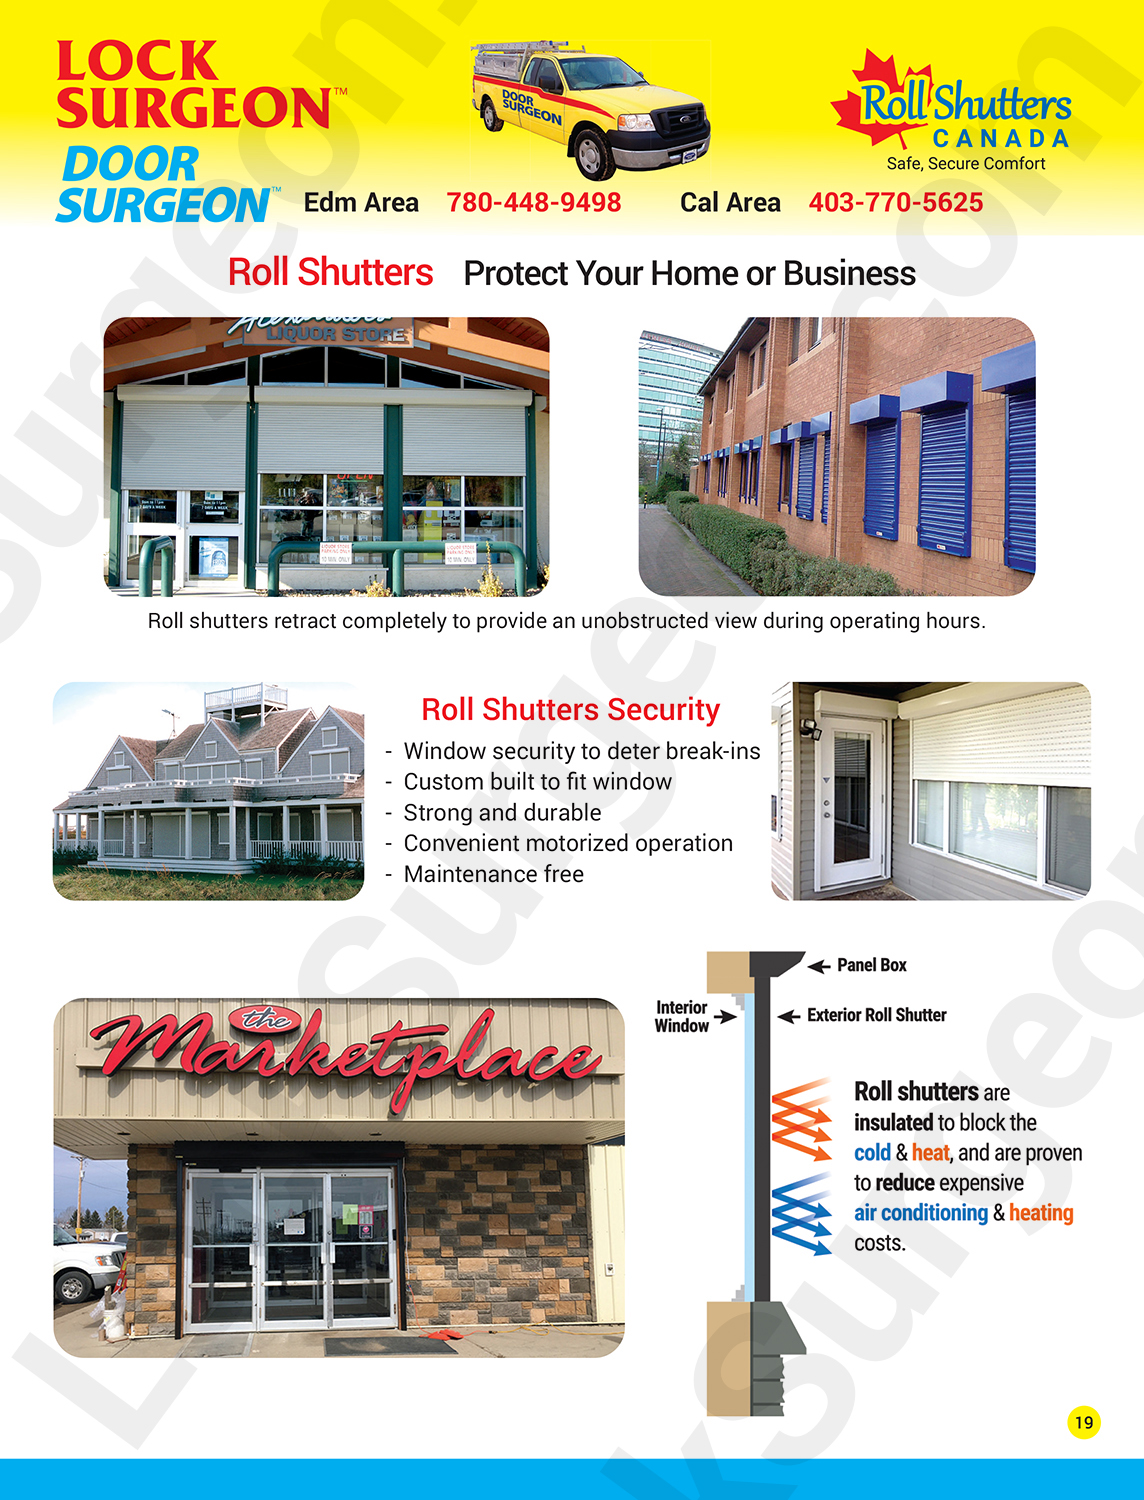 Roll shutters for storefronts, industrial complexes, inventory protection, windows and entrances.